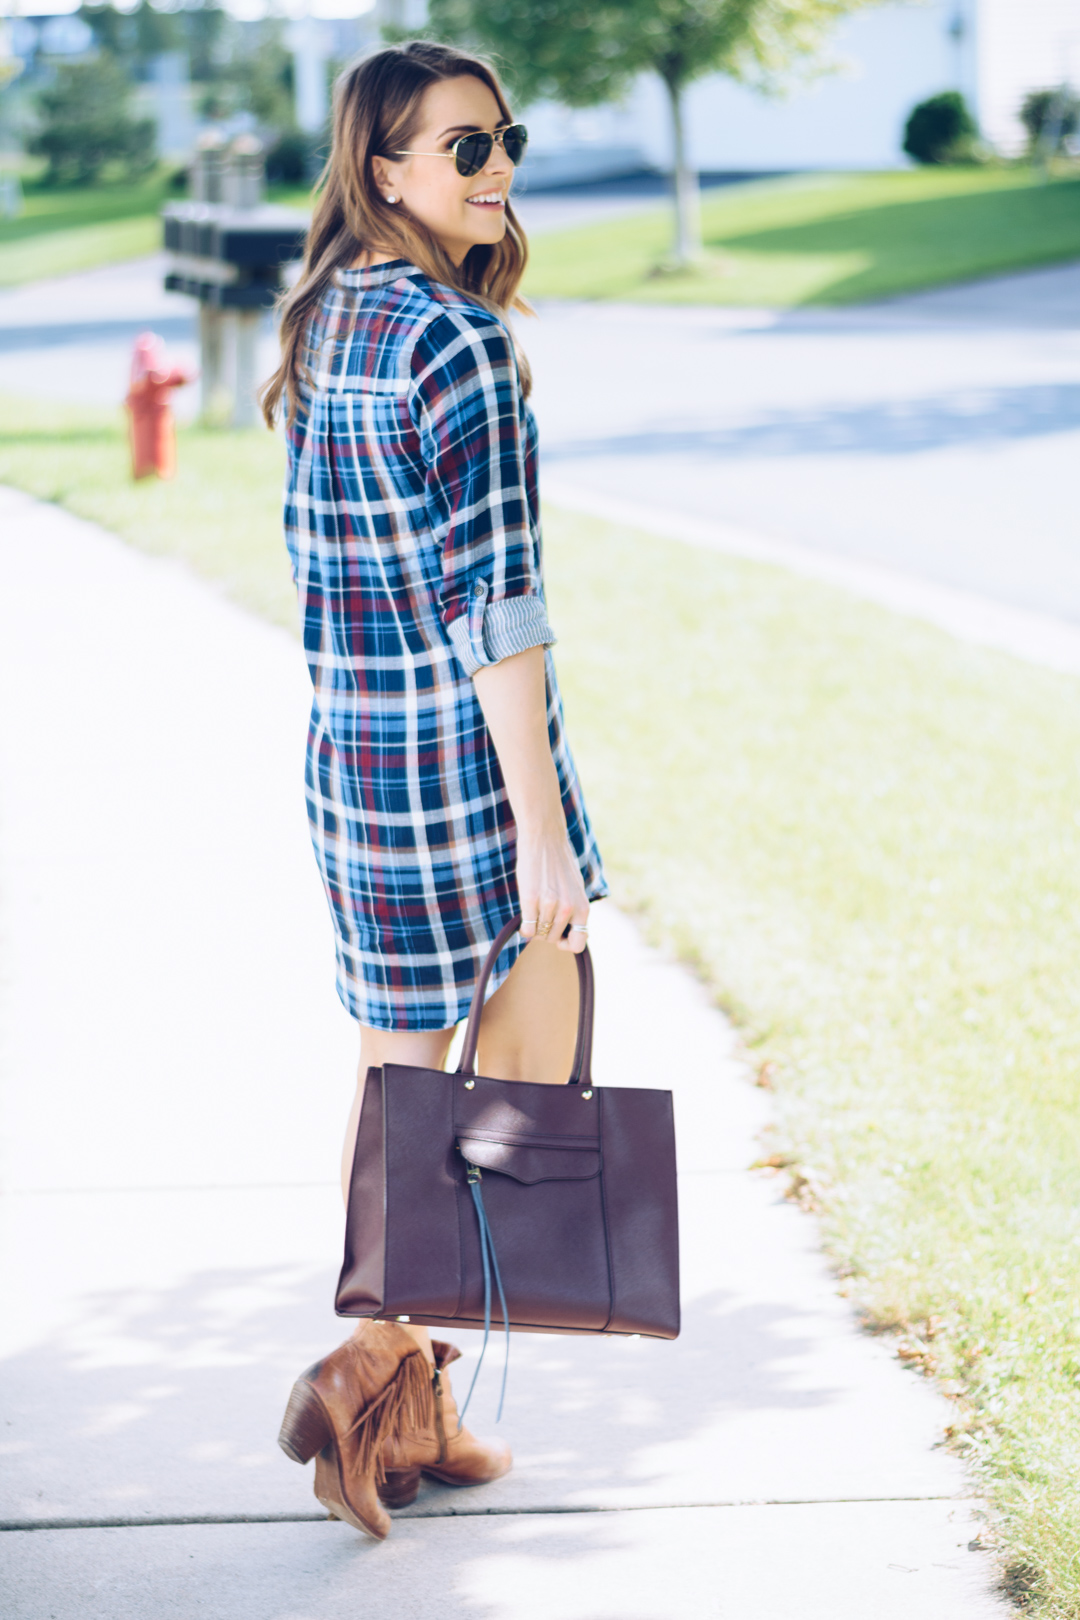 flannel shirt dress outfit, francescas flannel dress, classic ray ban aviators outfit, rebecca minkoff medium mab tote black cherry